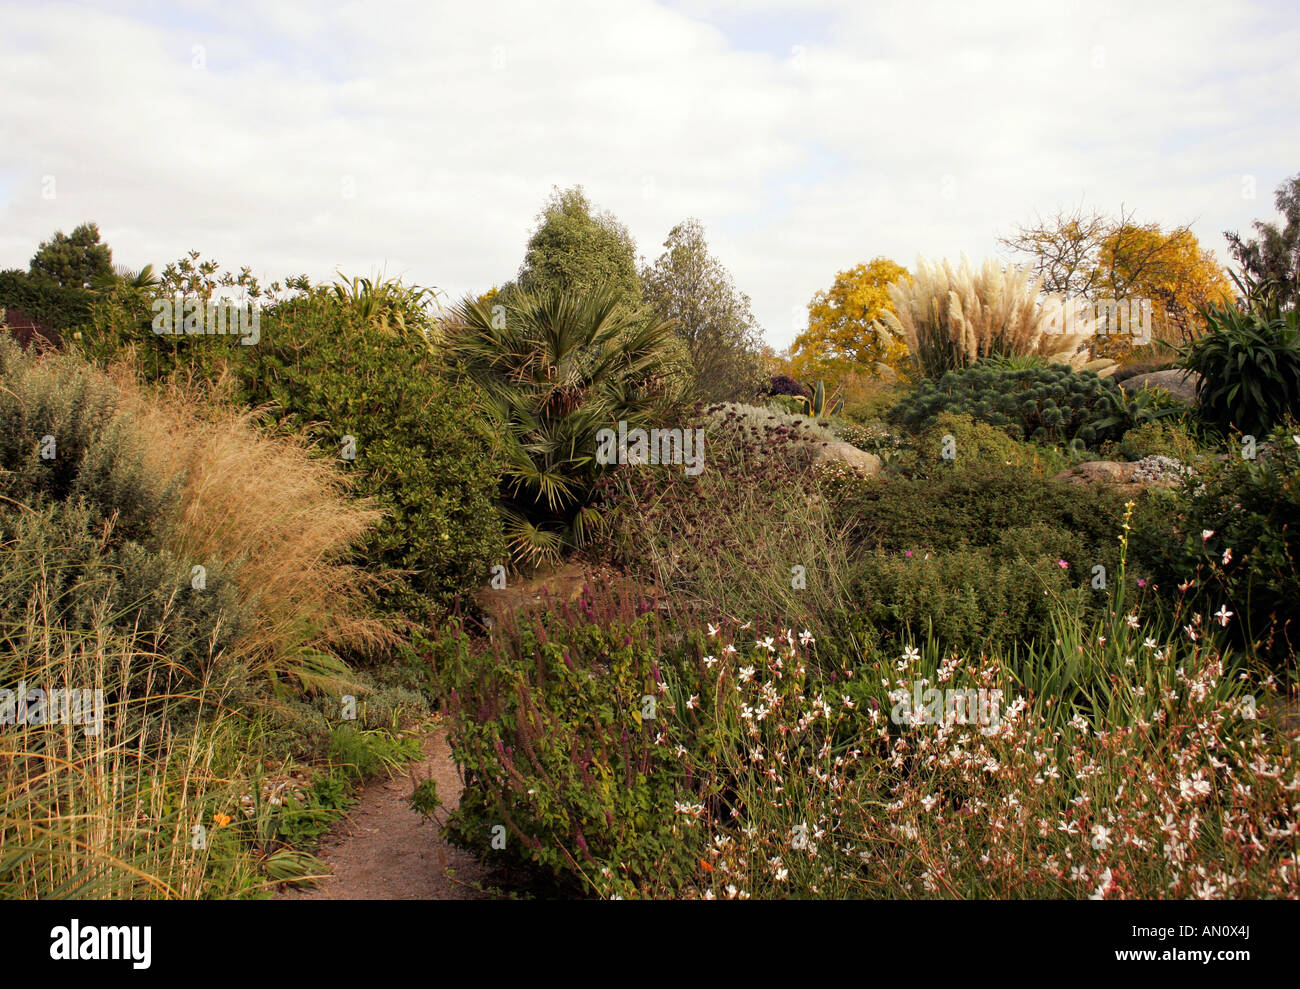 GRASSES AND SHRUBS GROWING IN AN AUTUMN DRY GARDEN. RHS HYDE HALL ESSEX. Stock Photo